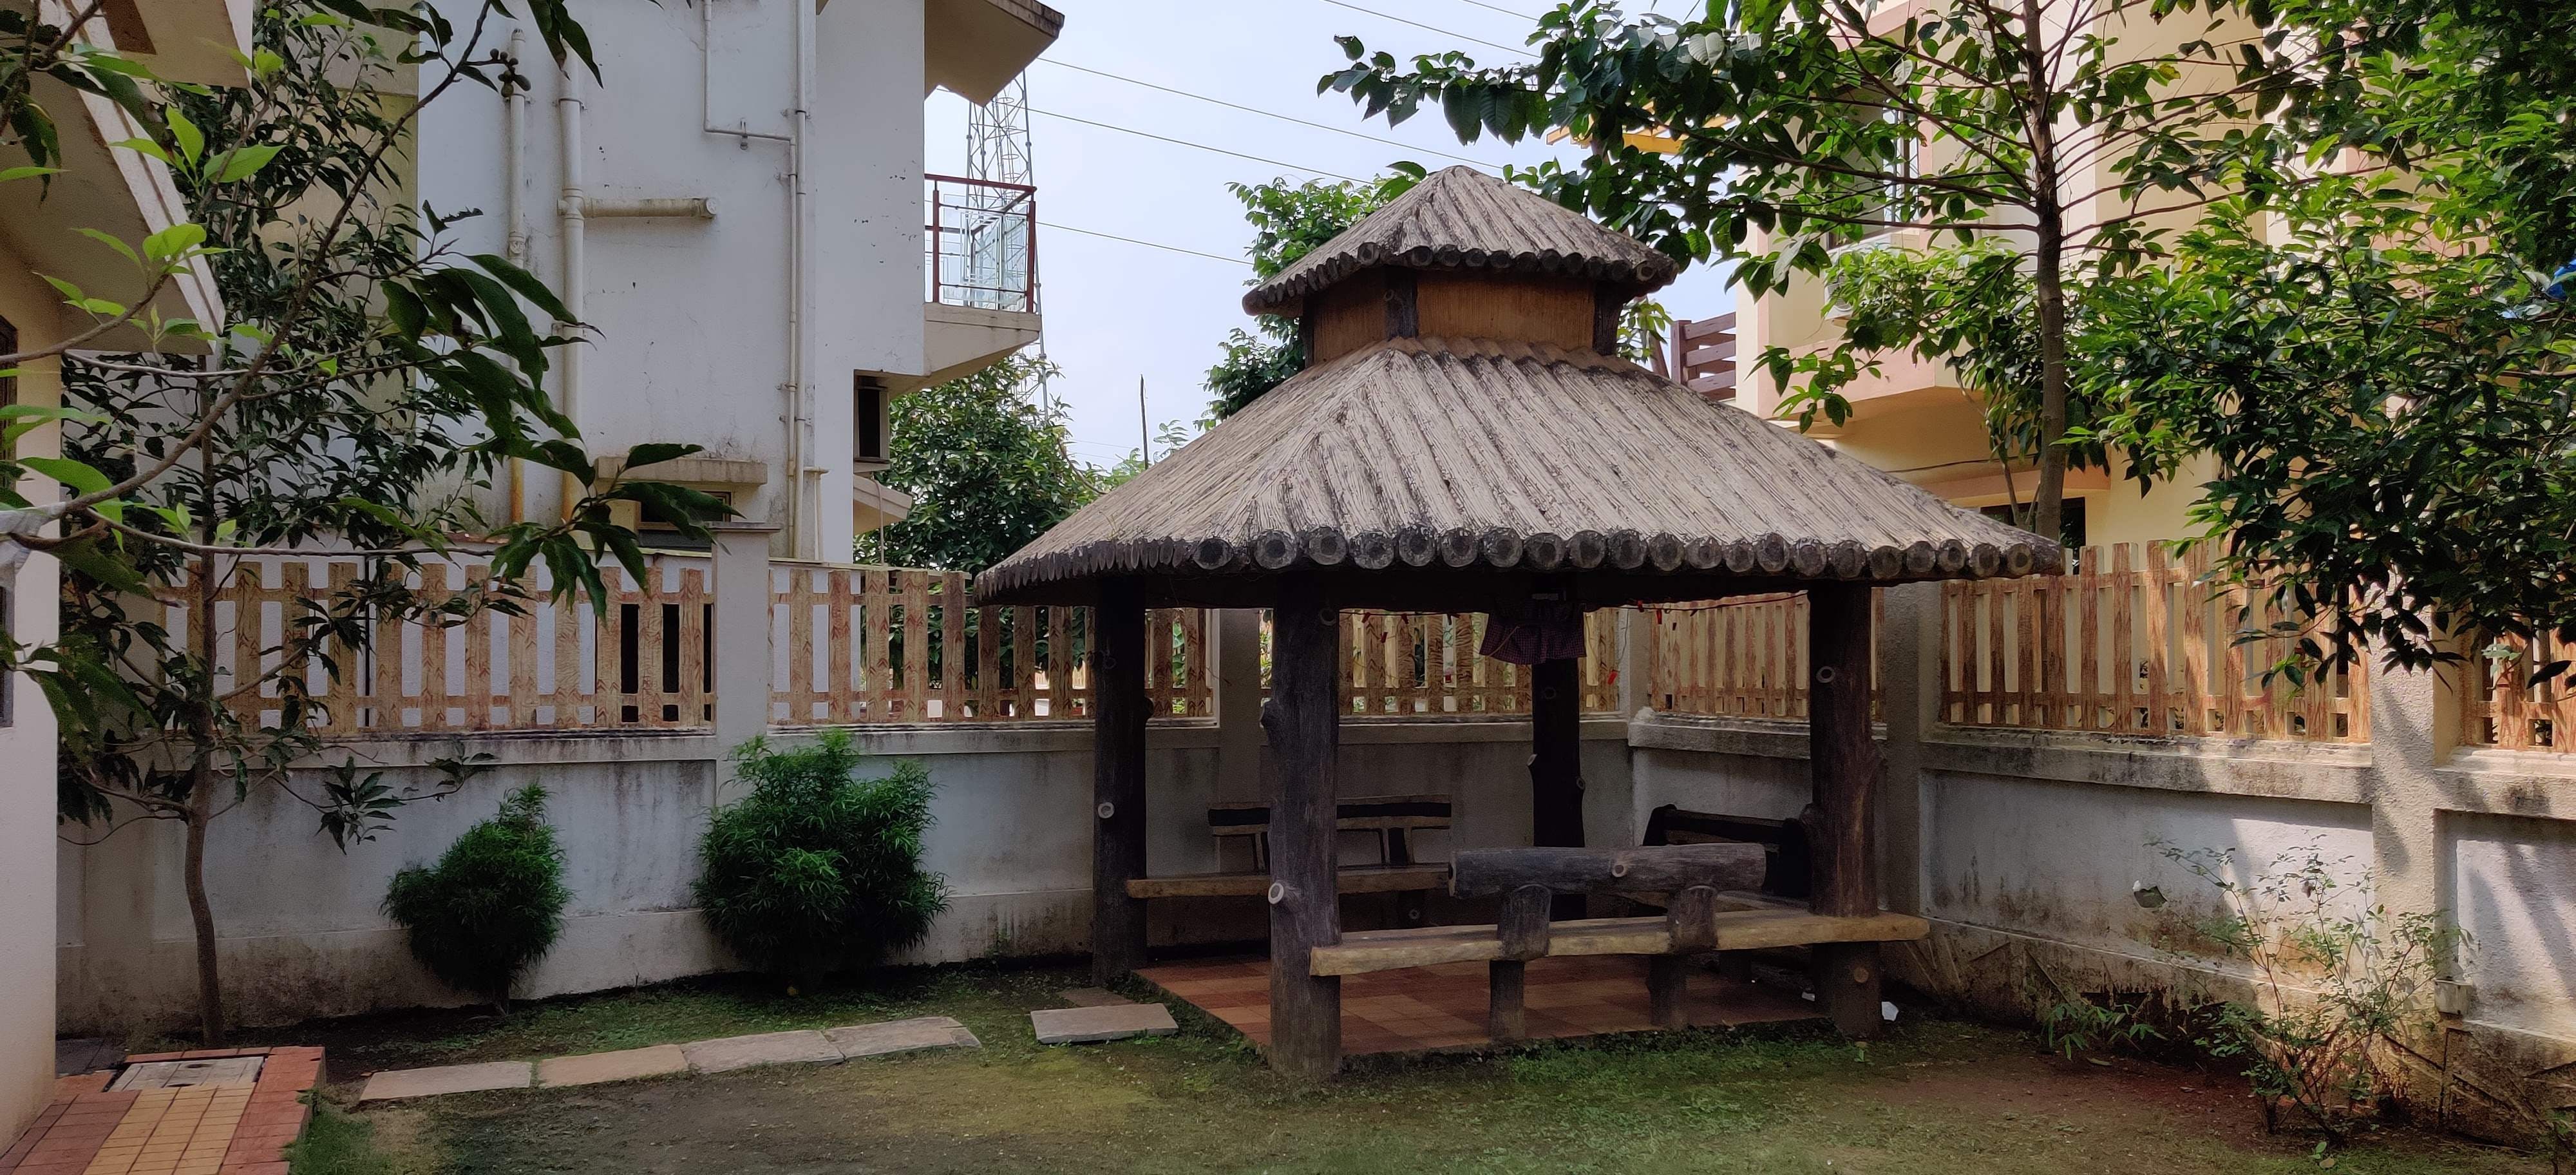 Gazebo,Property,Building,Roof,Pavilion,Outdoor structure,House,Courtyard,Shade,Hacienda